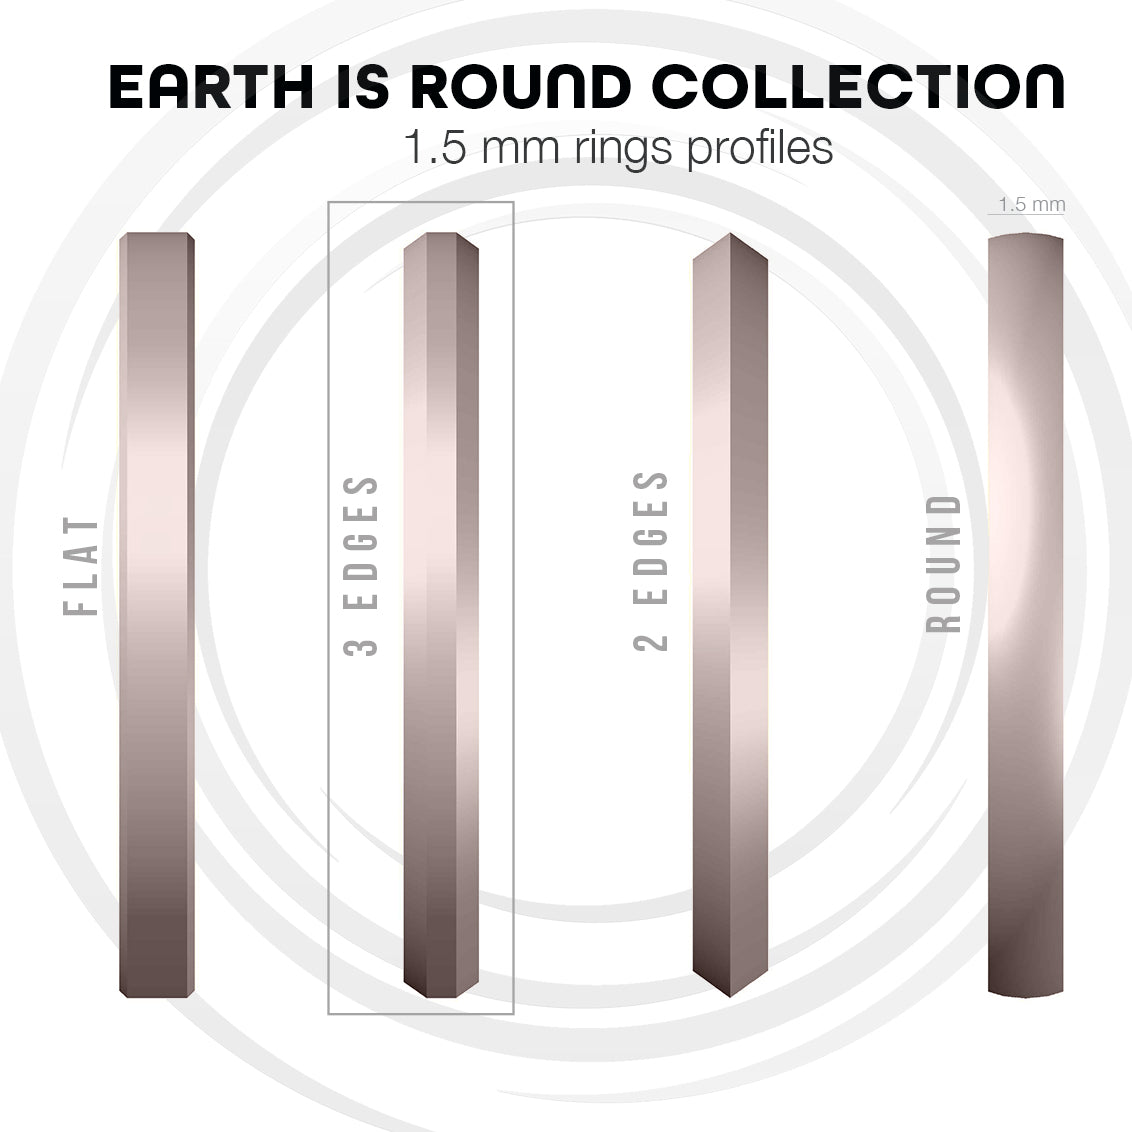 Bague EARTH IS ROUND 1.5mm trois bords profil or rouge 18k